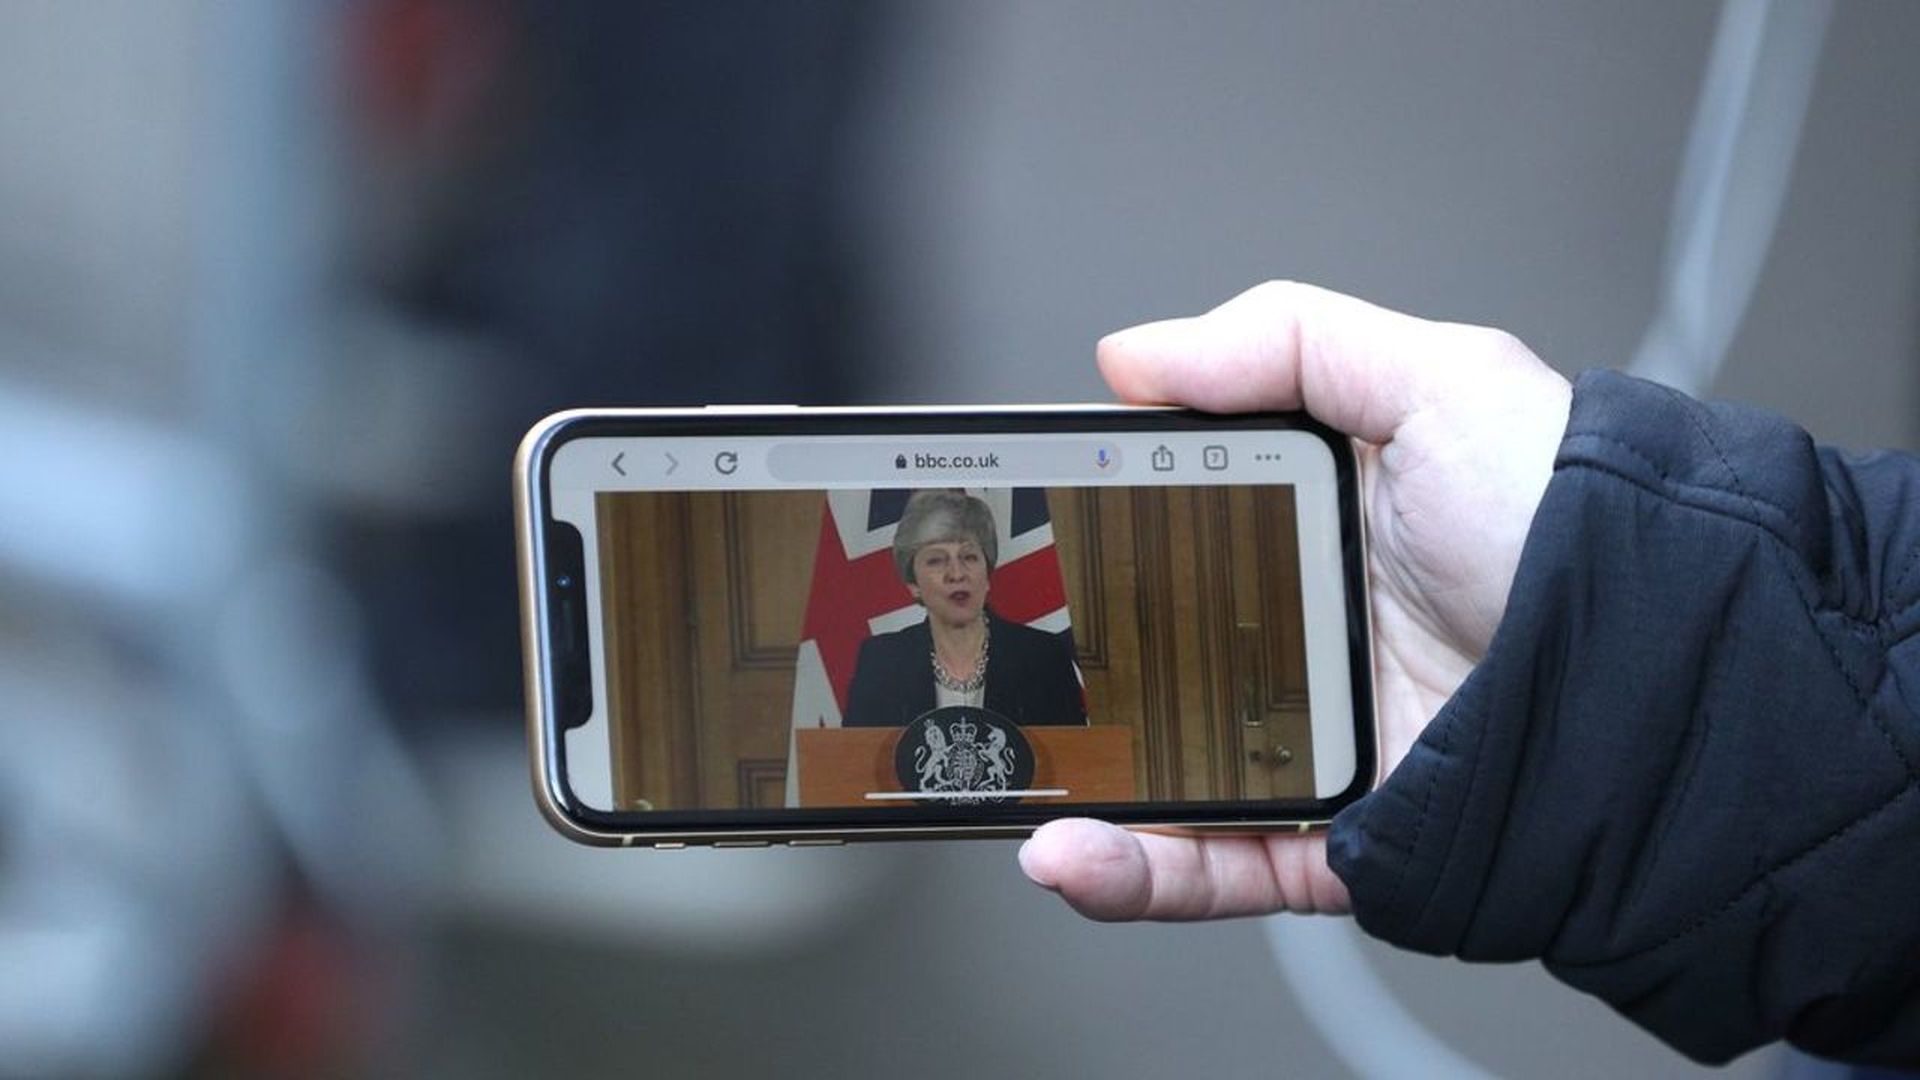 Theresa May speaking at a press conference. Someone streams it on their phone